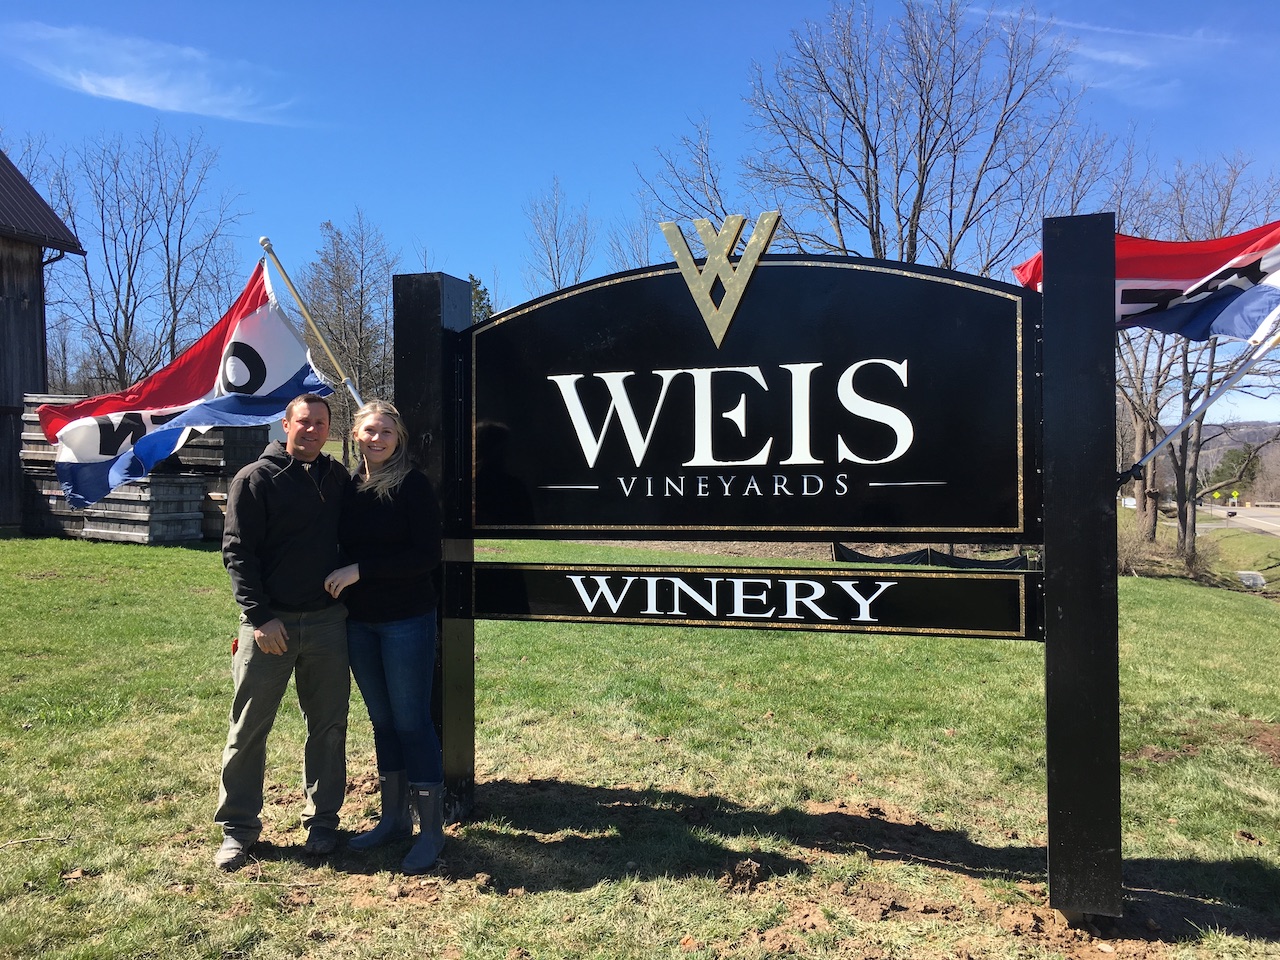 Ashlee and Peter Weis stand in front of the first Weis Vineyards sign in the front yard.  The wind is blowing and two open flags are waving in the background